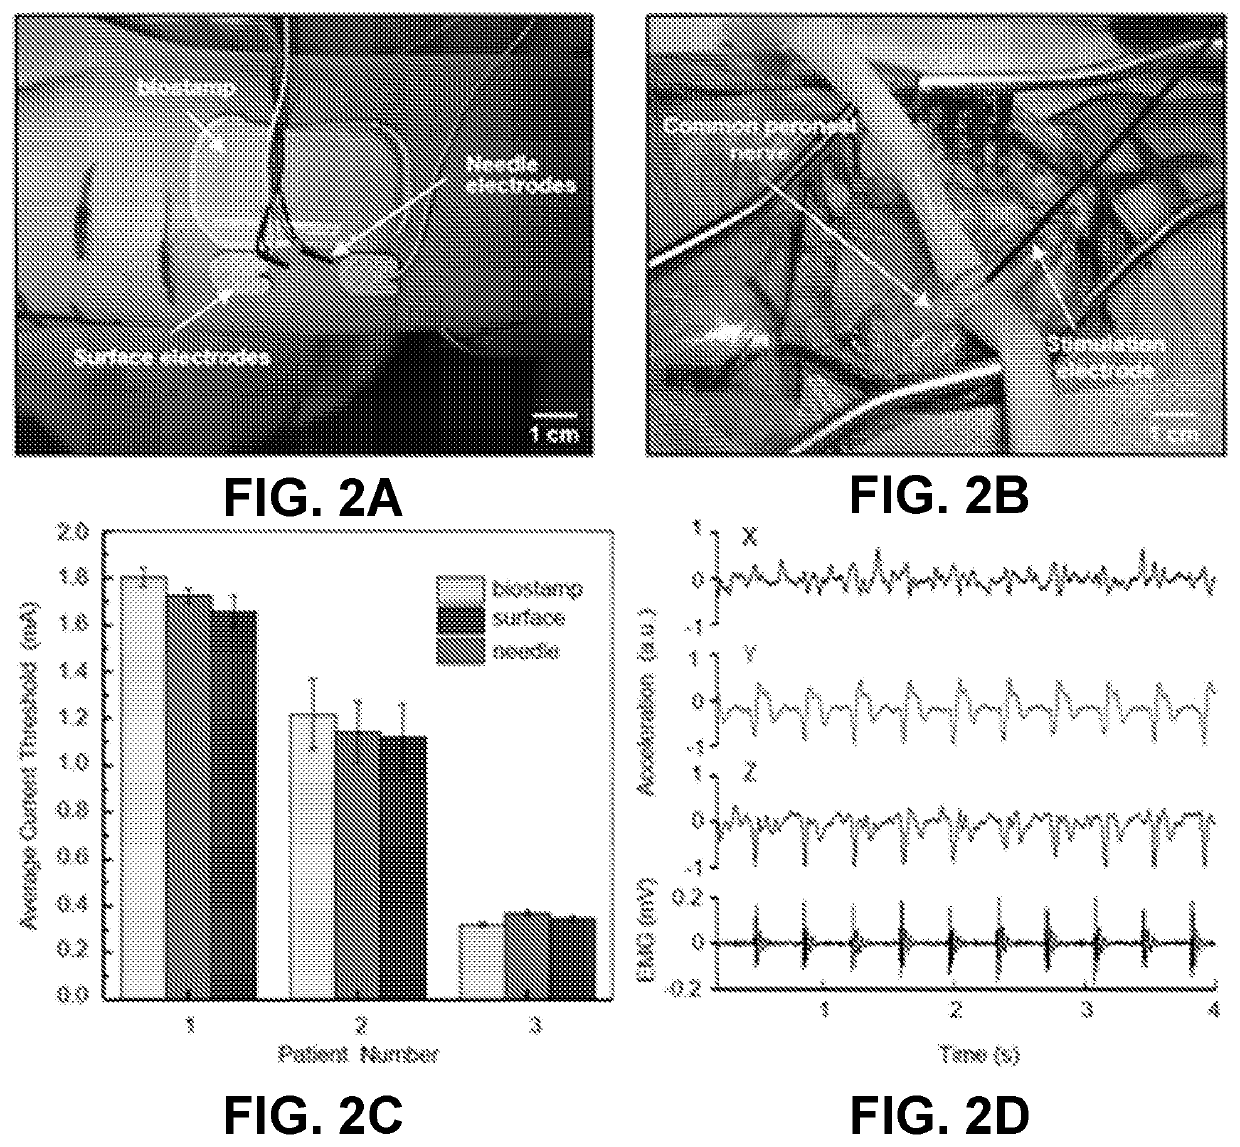 Intraoperative monitoring of neuromuscular function with soft, tissue-mounted wireless devices